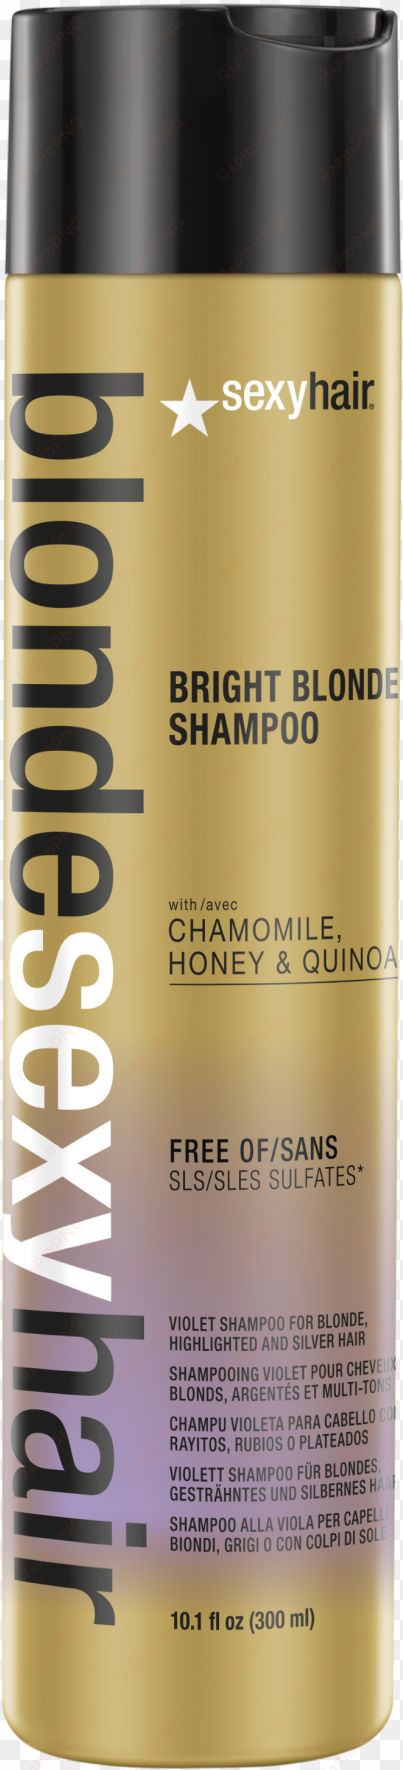 bright blonde shampoo violet shampoo for blonde, highlighted - sexy hair concepts strong sexy hair strengthening nourishing